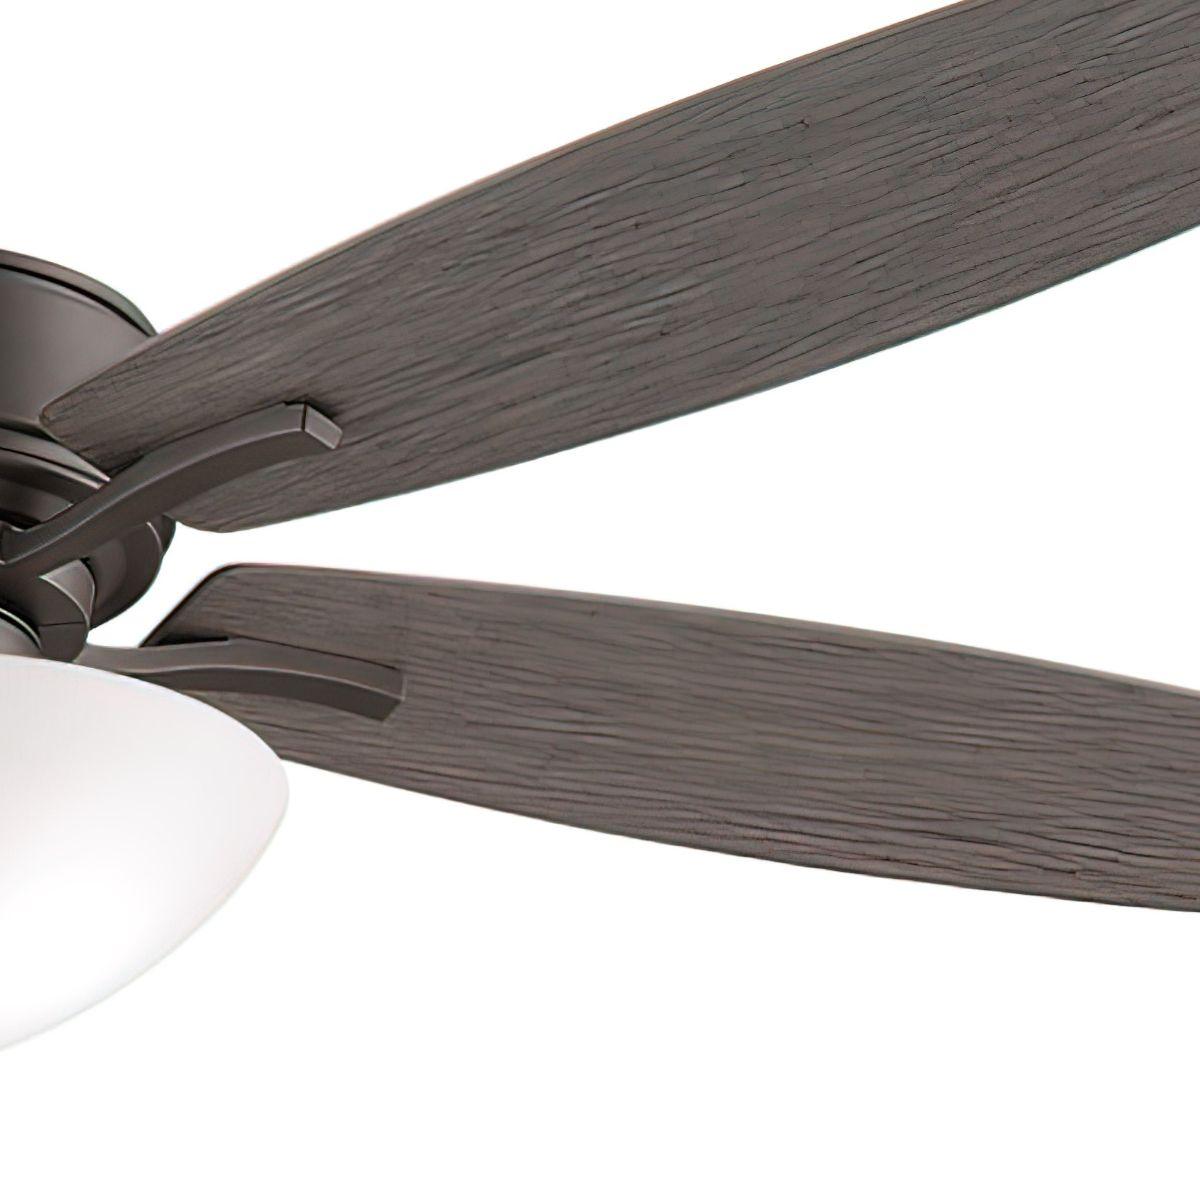 Aire Deluxe 5 Blades 52 Inch Ceiling Fan With Light And Pull Chain